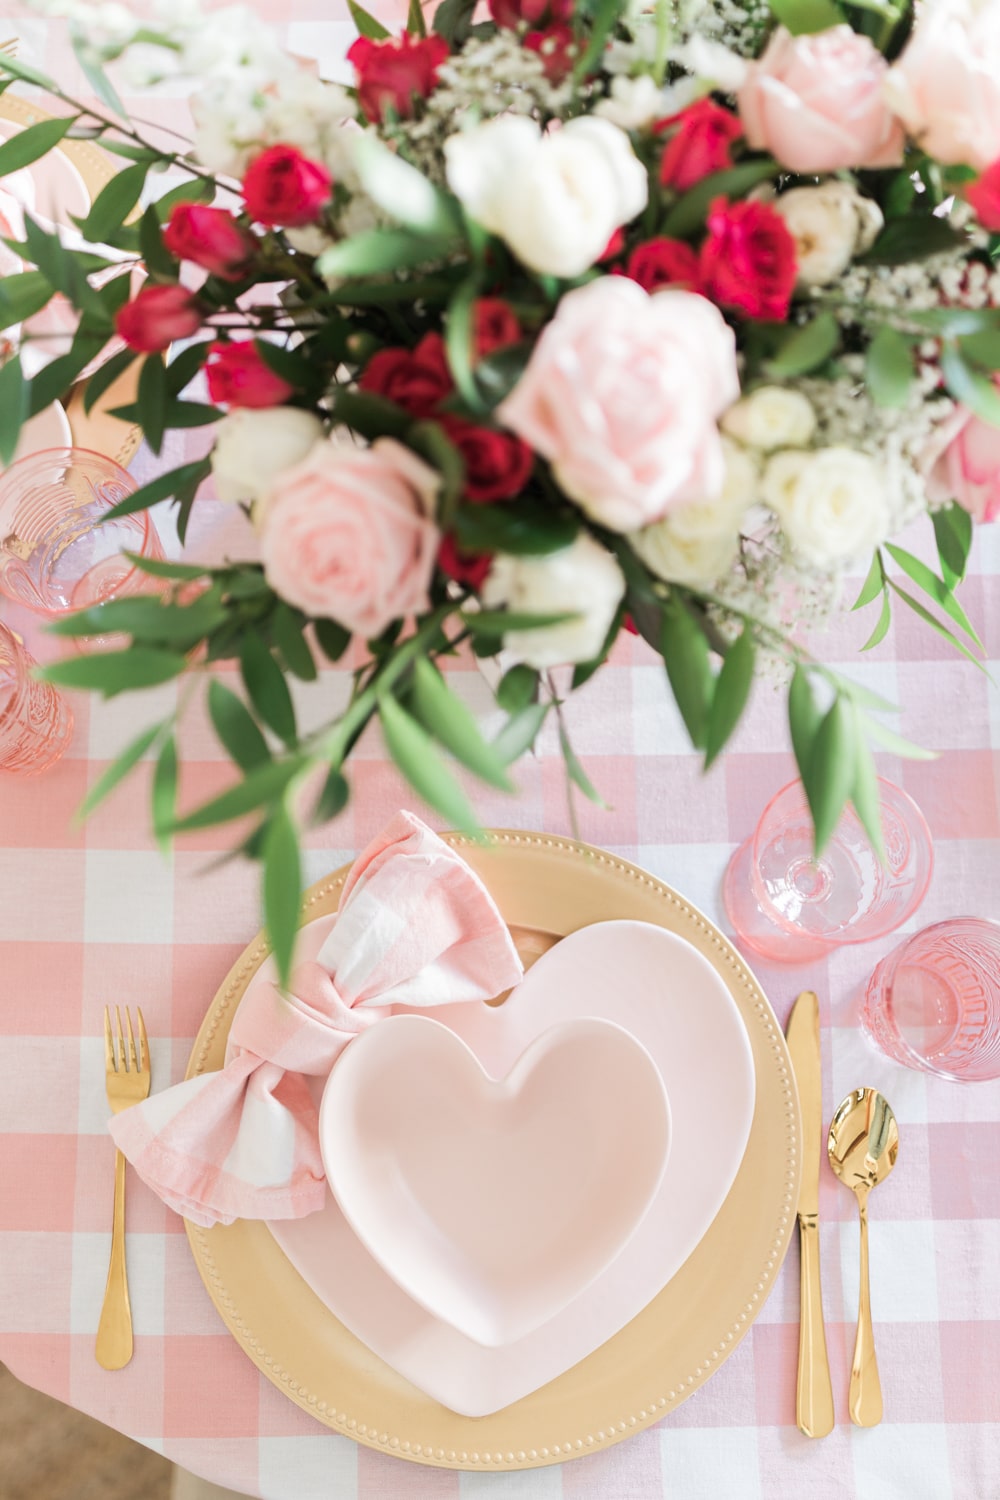 Gold and pink Valentine's Day tablescape designed by blogger Stephanie Ziajka on Diary of a Debutante